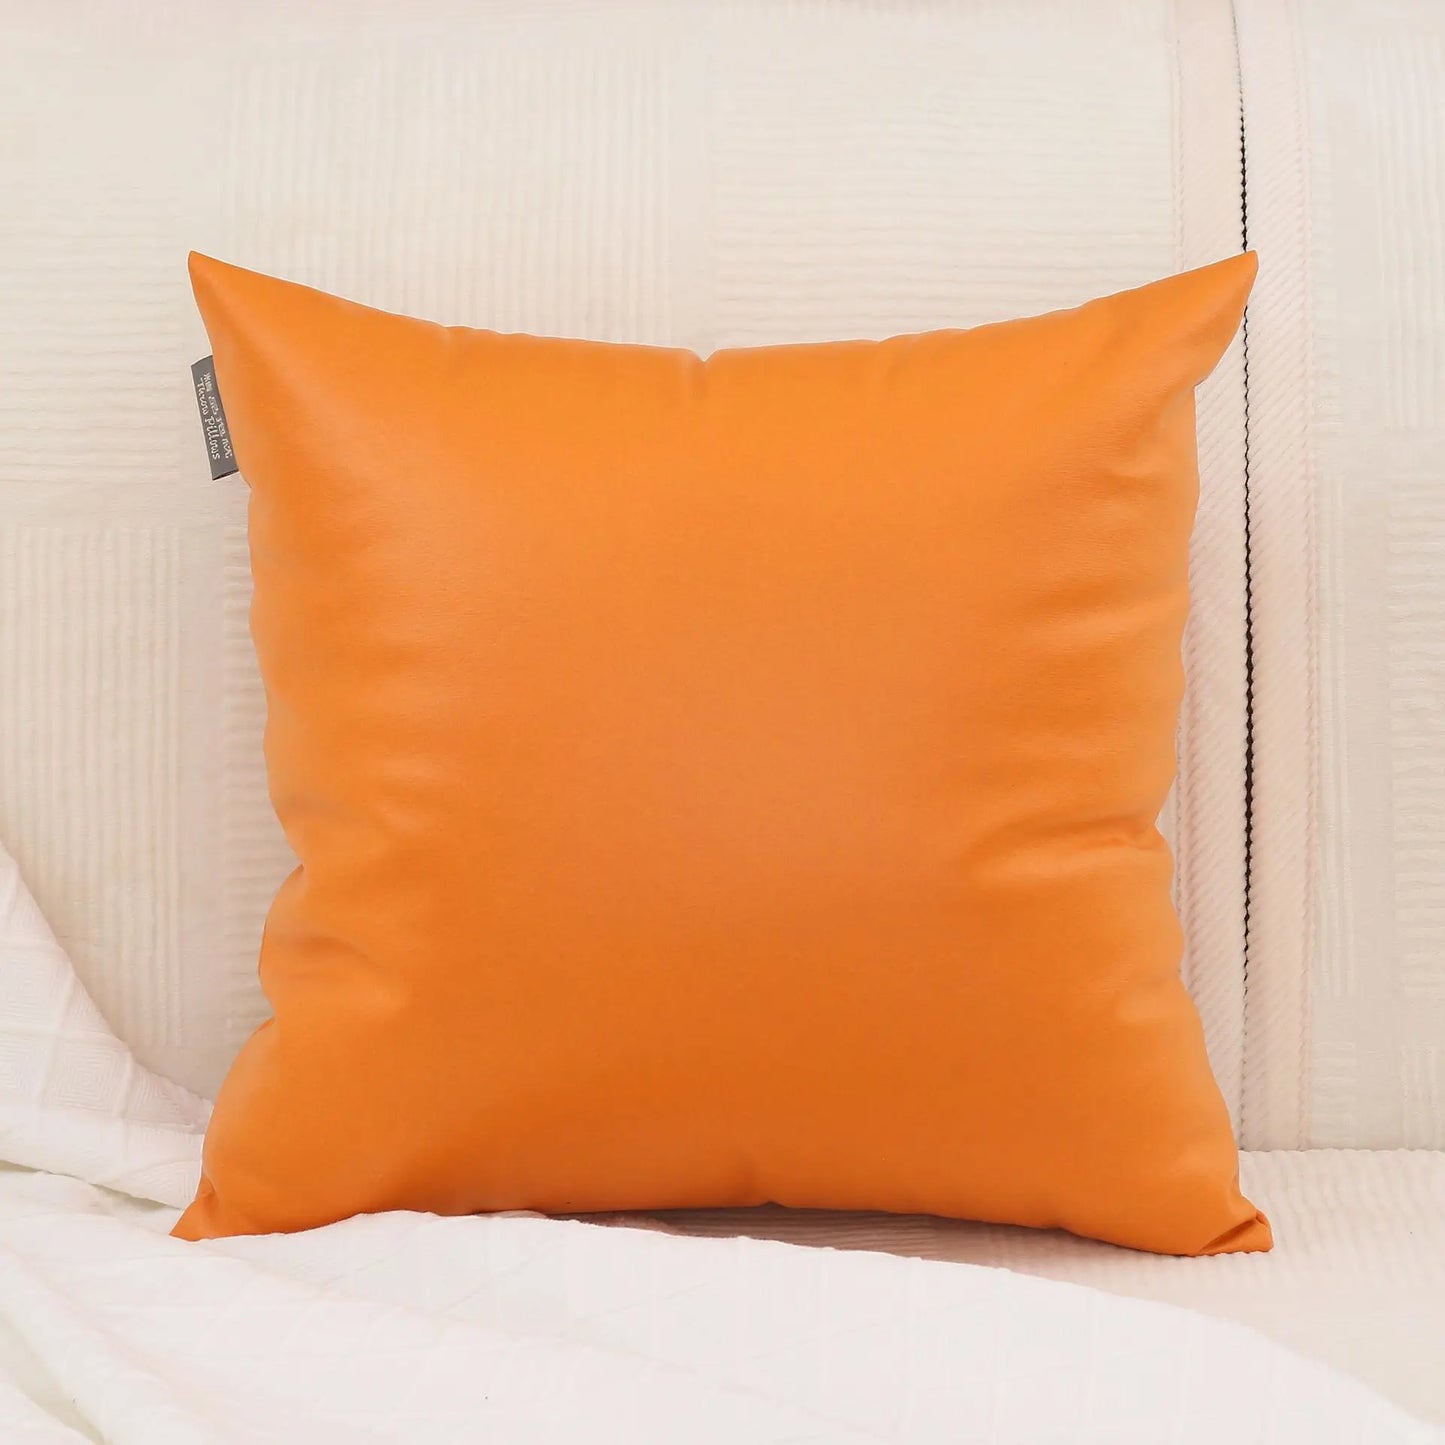 Embroidered Leather Pillow Cover